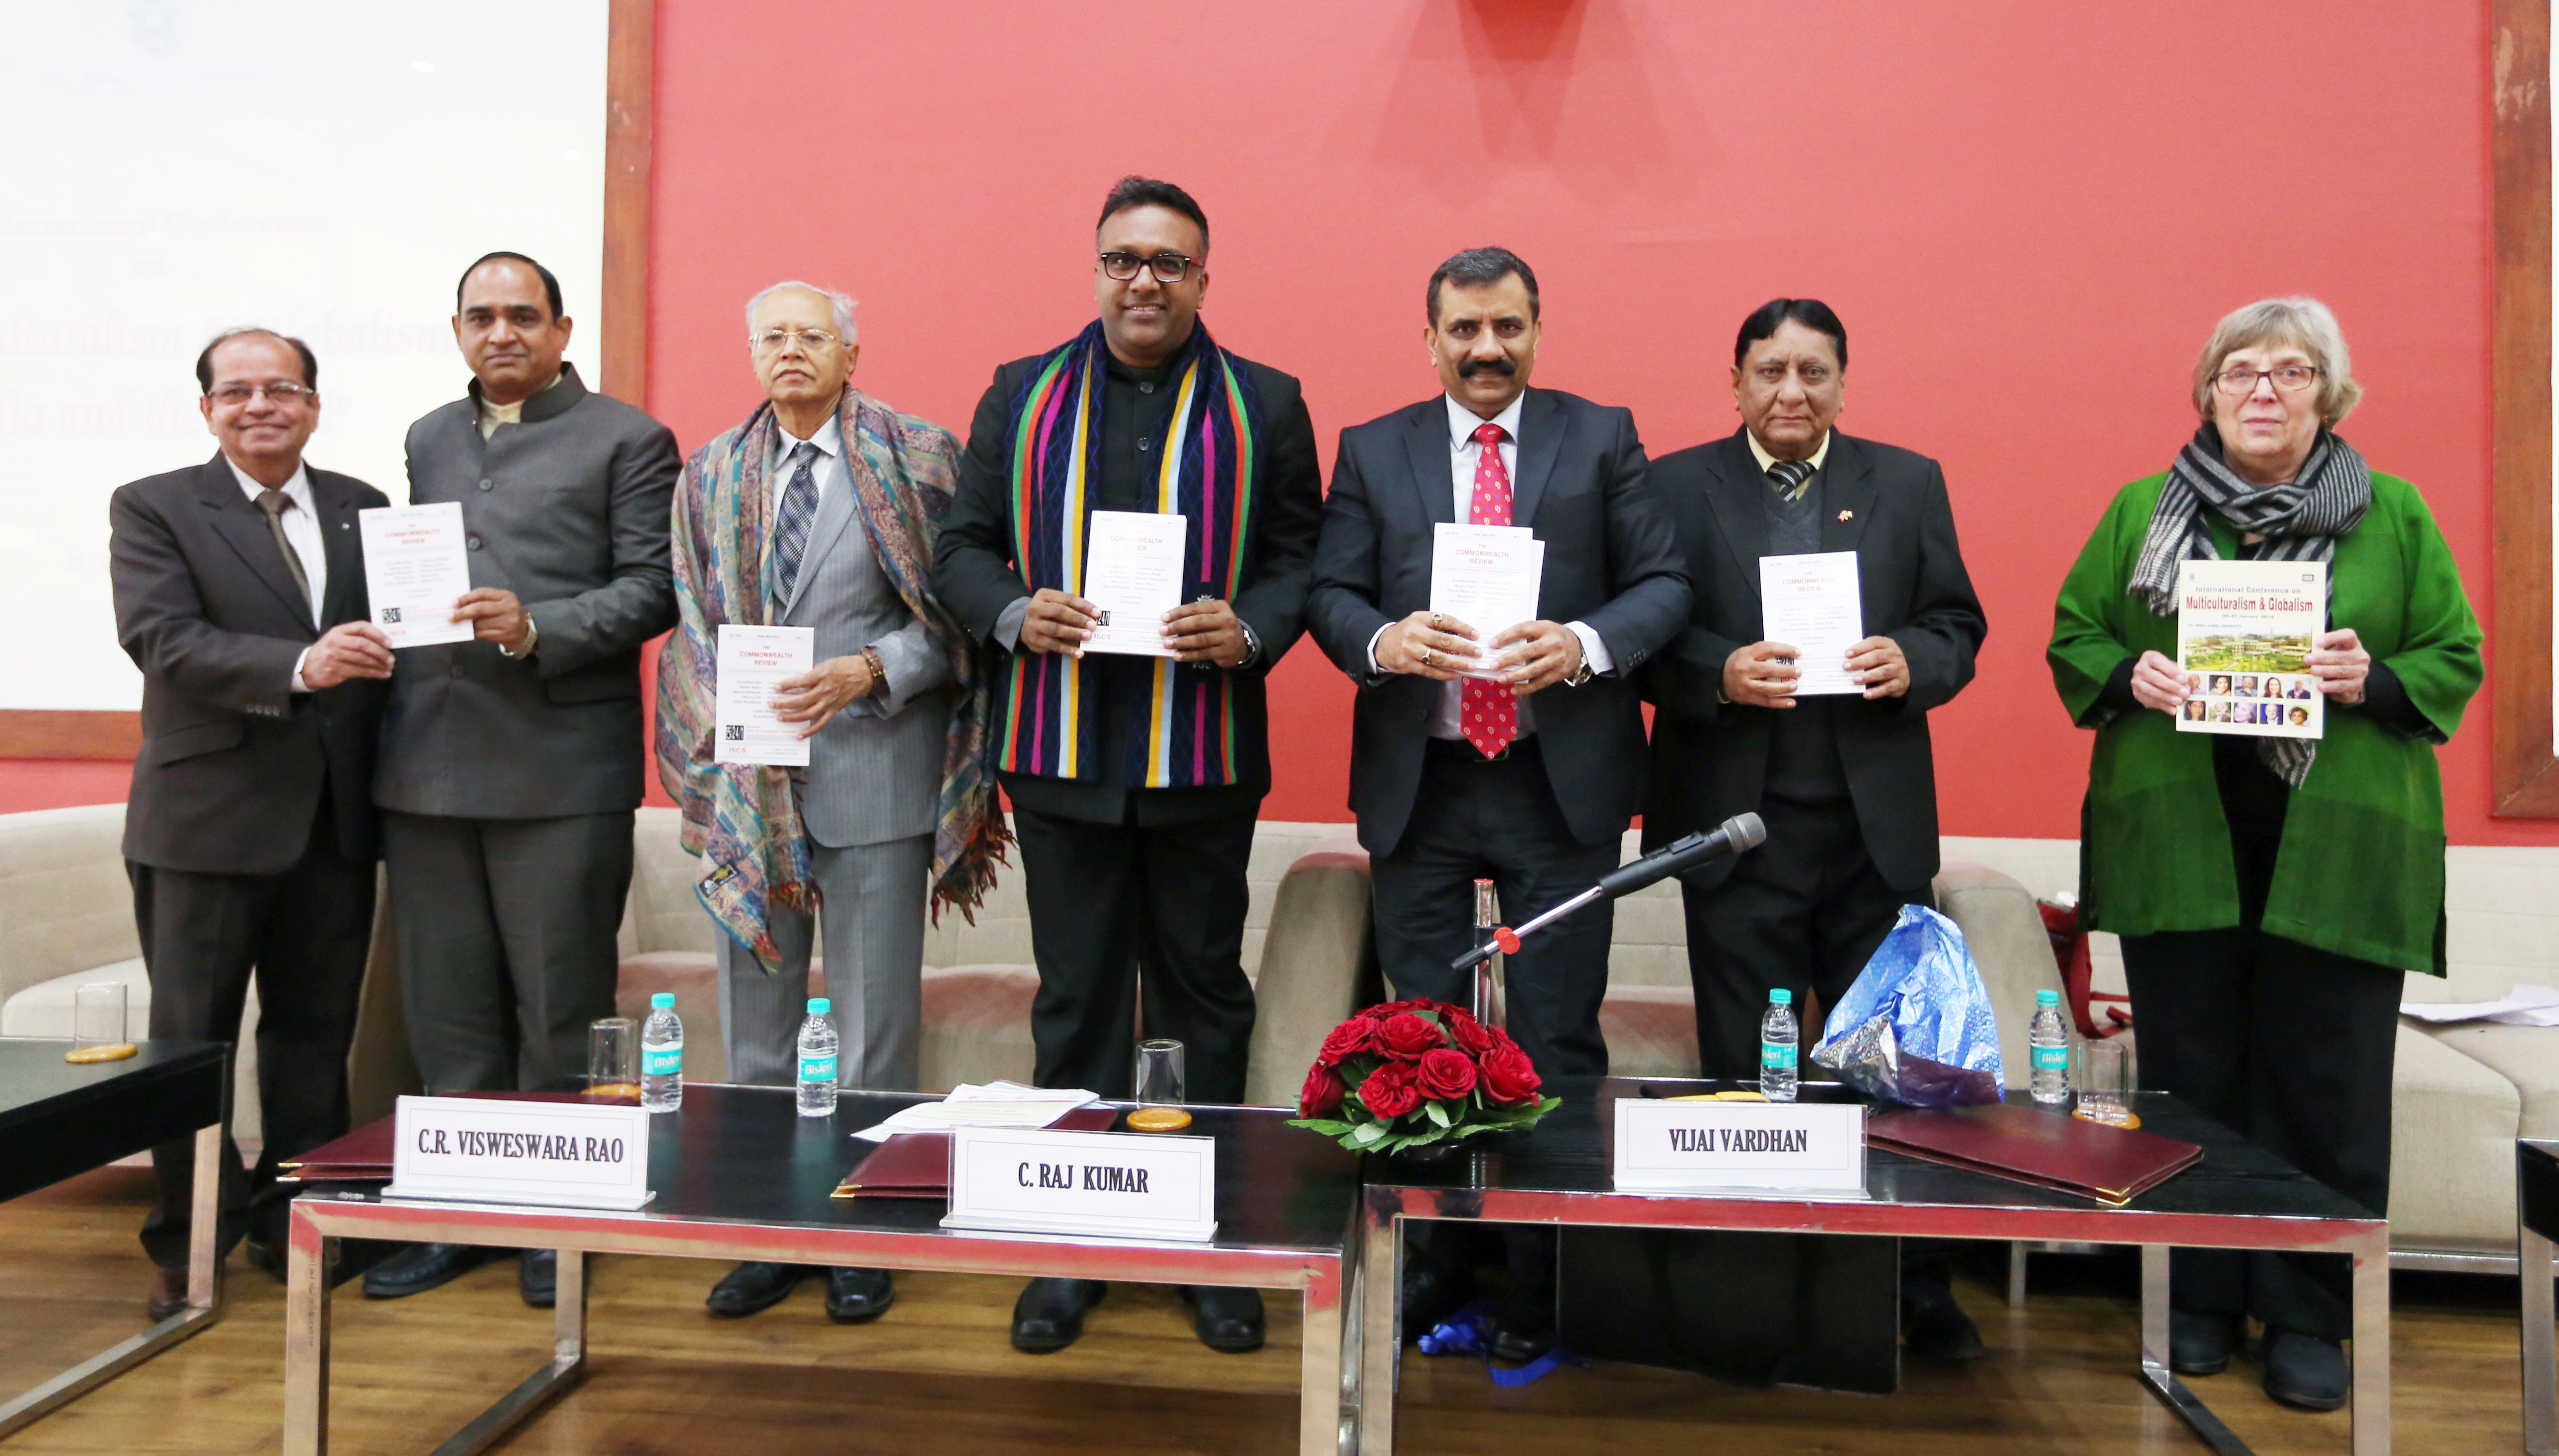 Multiculturalism the New Paradox, Globalism the New Reality: Experts at International Conference by Jindal University